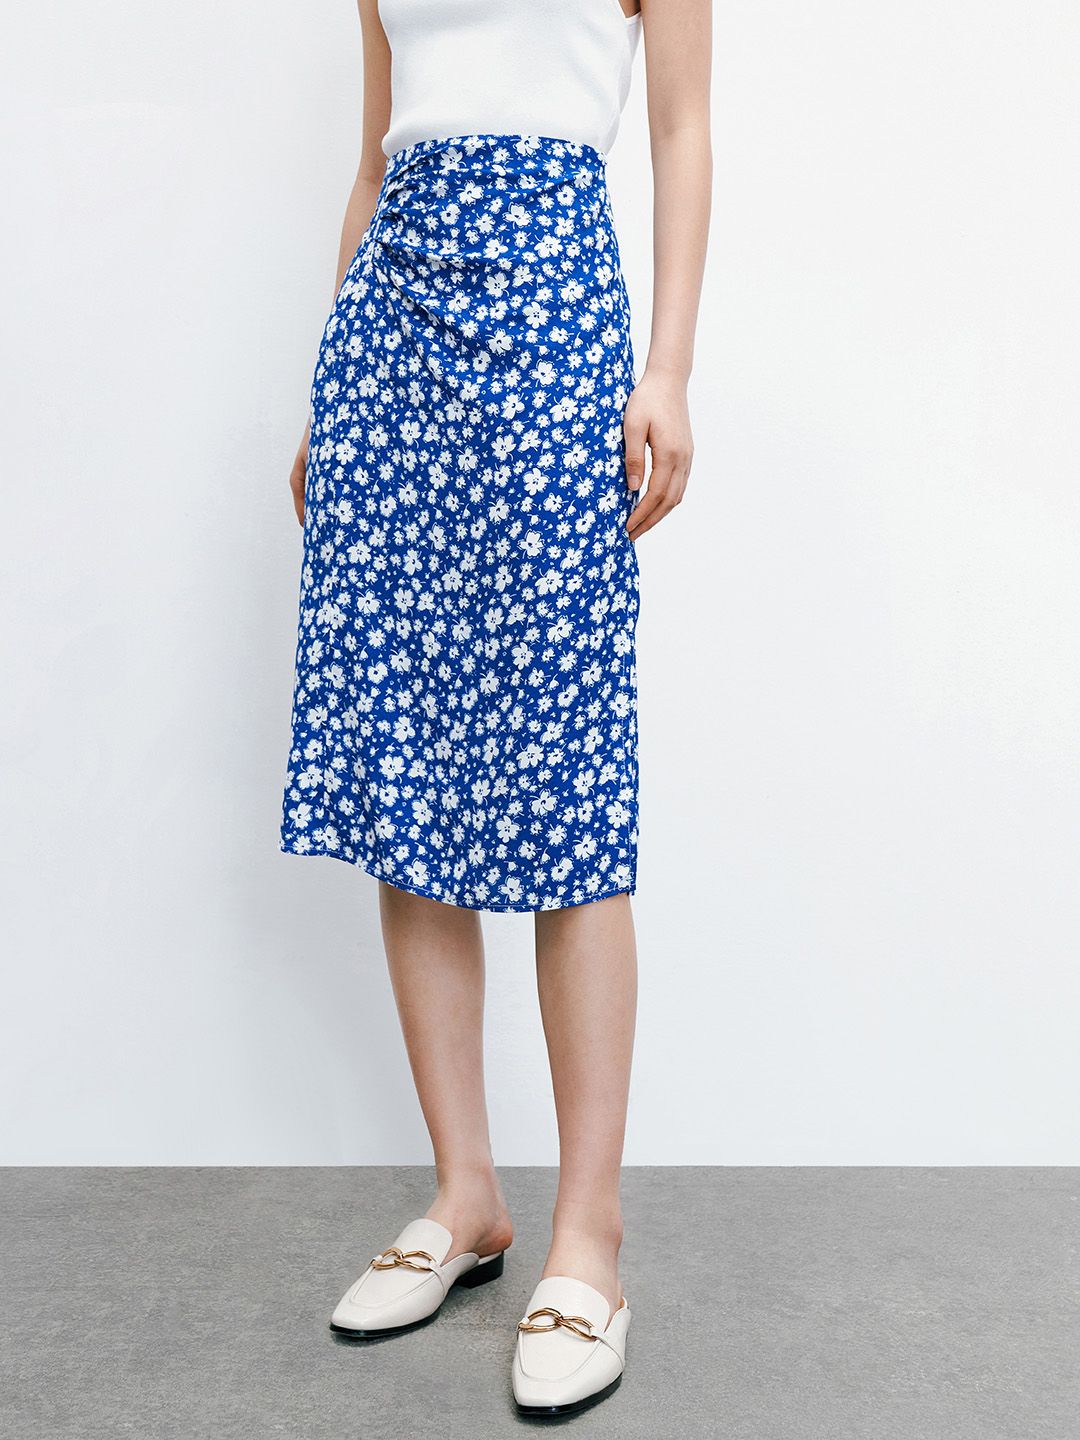 Urban Revivo Floral Printed Ruched A-Line Midi Skirt Price in India